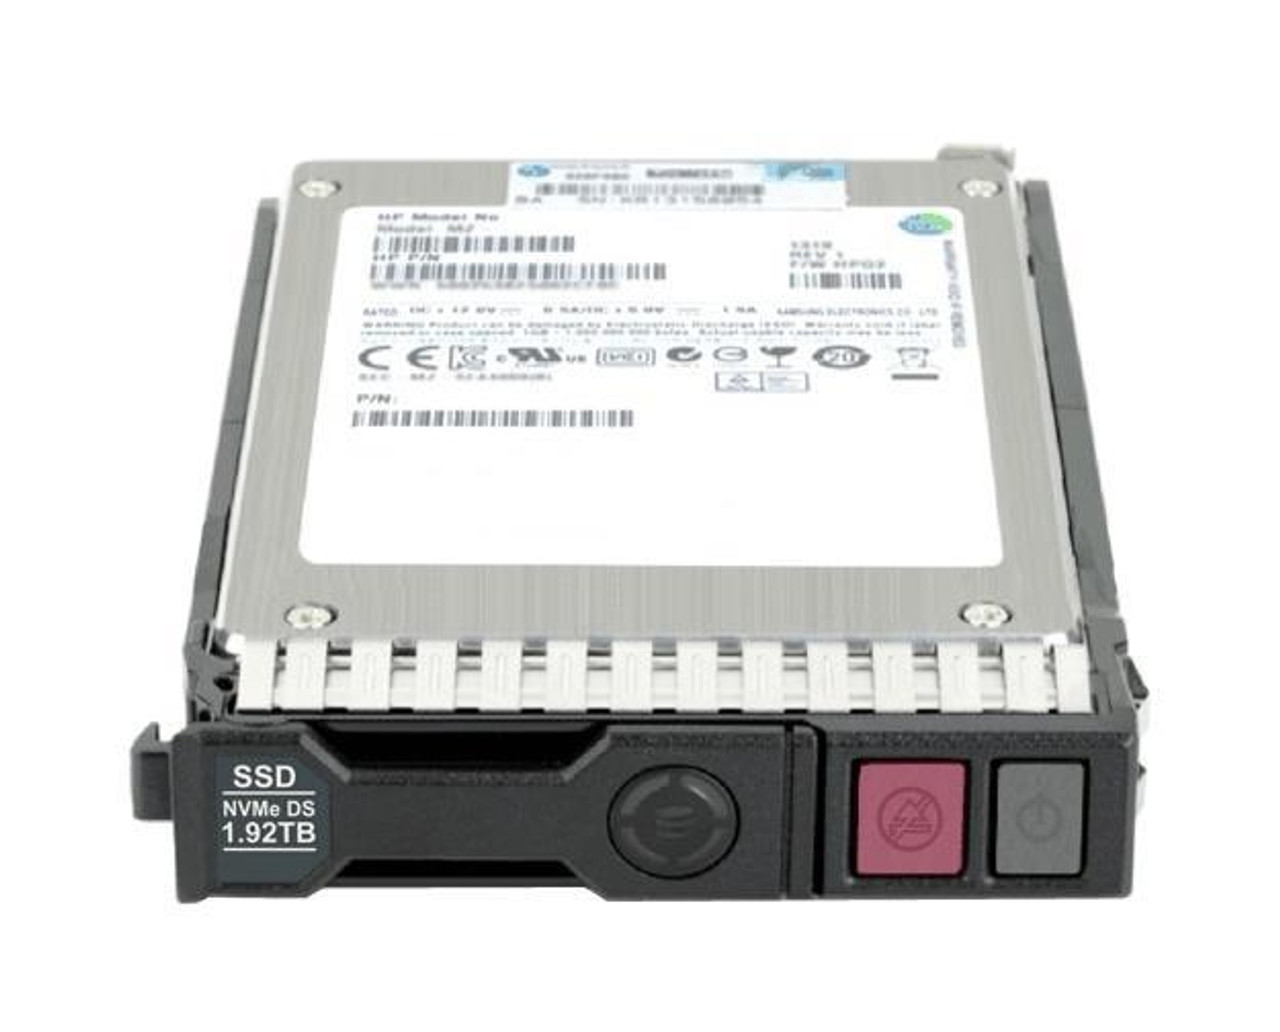 P16501-H21 HPE 1.92TB PCI Express NVMe Read Intensive U.3 2.5-inch Internal Solid State Drive (SSD) with Smart Carrier